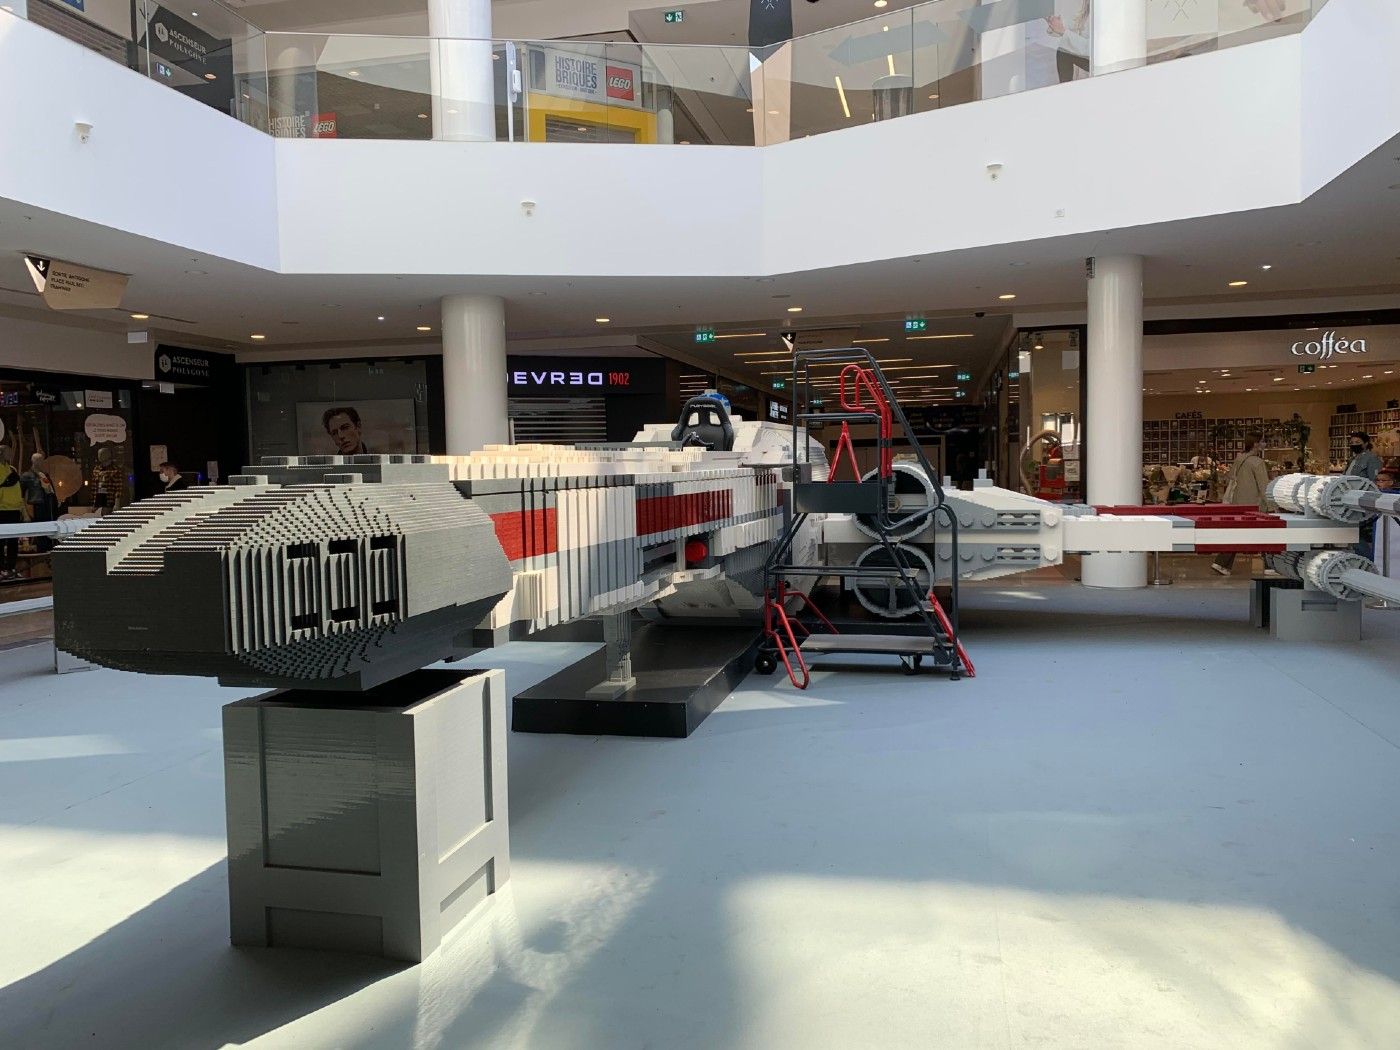 A life size Star Wars X-Wing replica made of LEGO